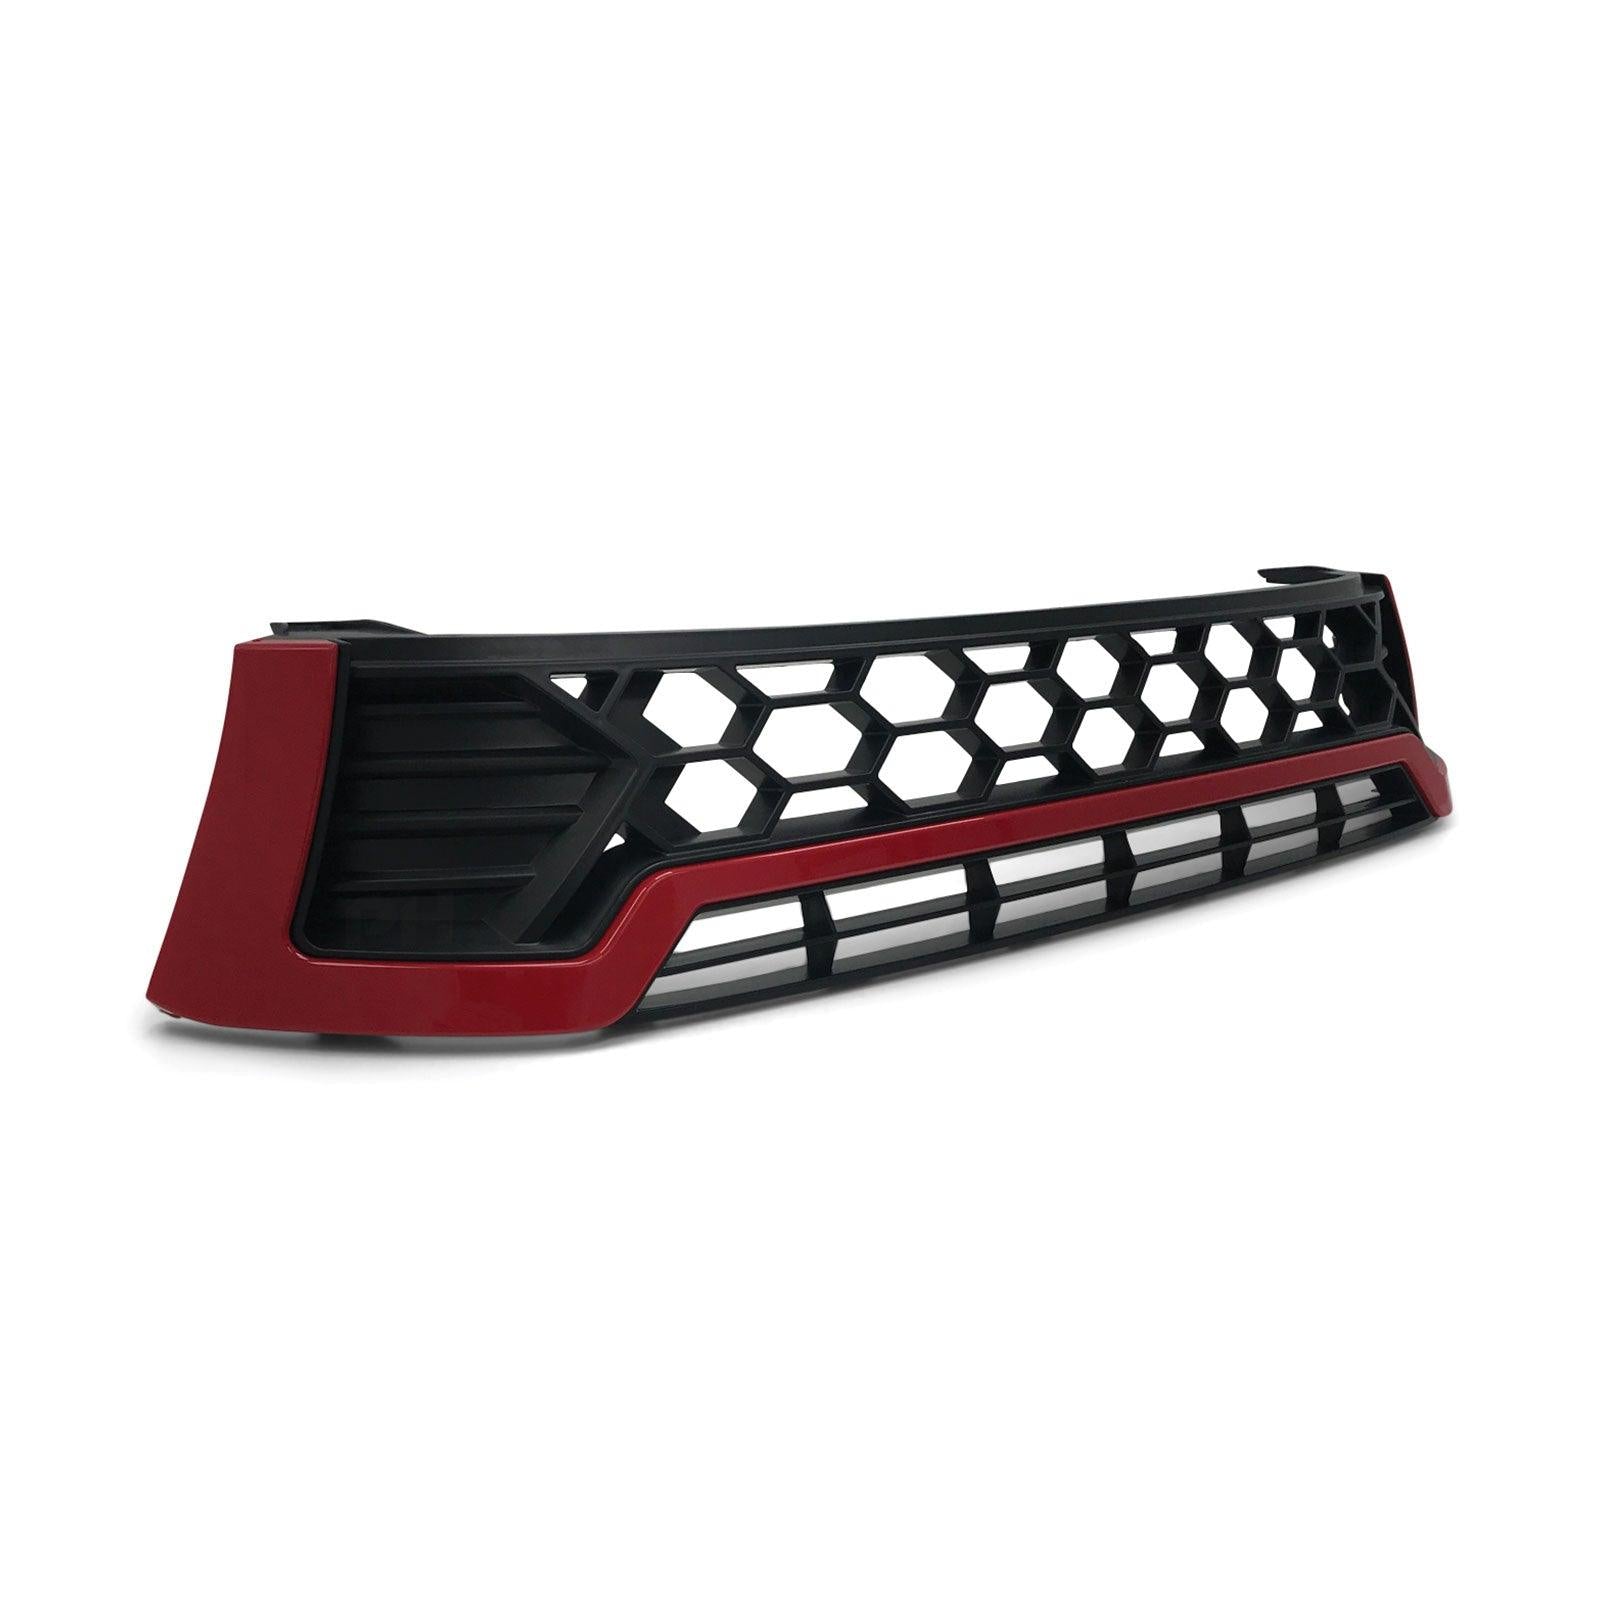 Grill Red Upgrade Fits Toyota Hilux 2015-2018 N80 SR5 Workmate - 4X4OC™